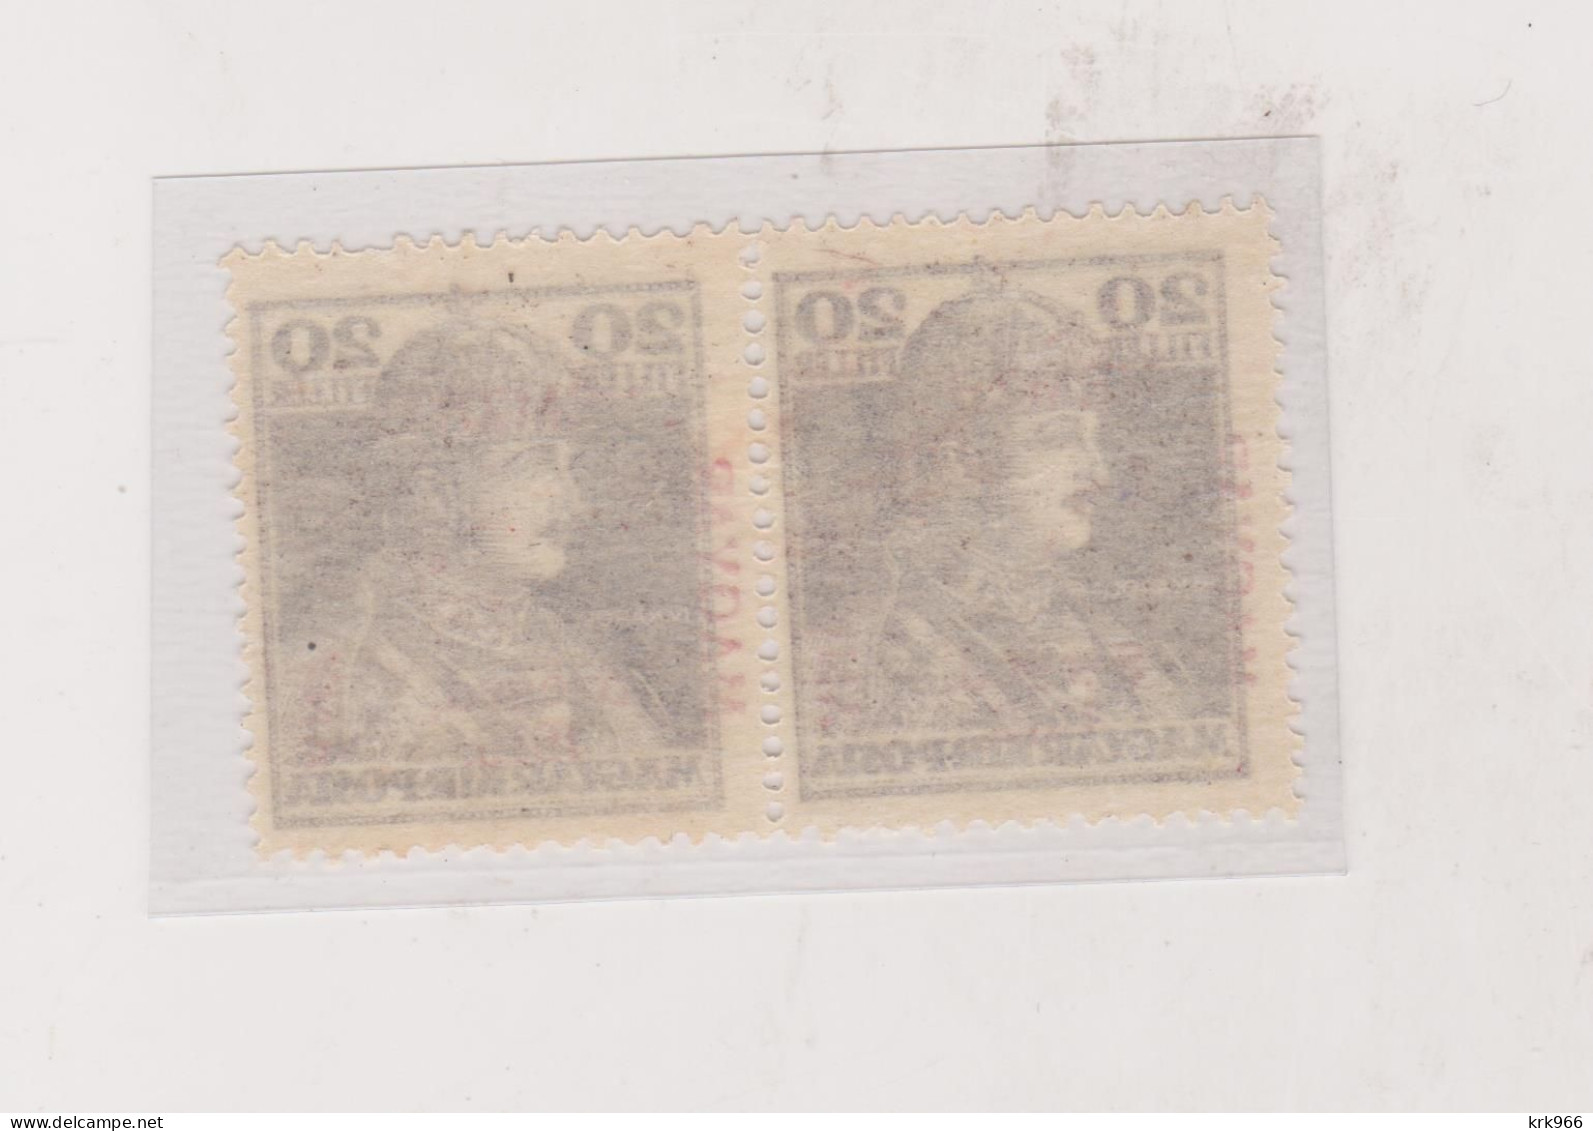 HUNGARY 1919 SZEGED SZEGEDIN Locals Mi 23 Pair  Hinged - Local Post Stamps